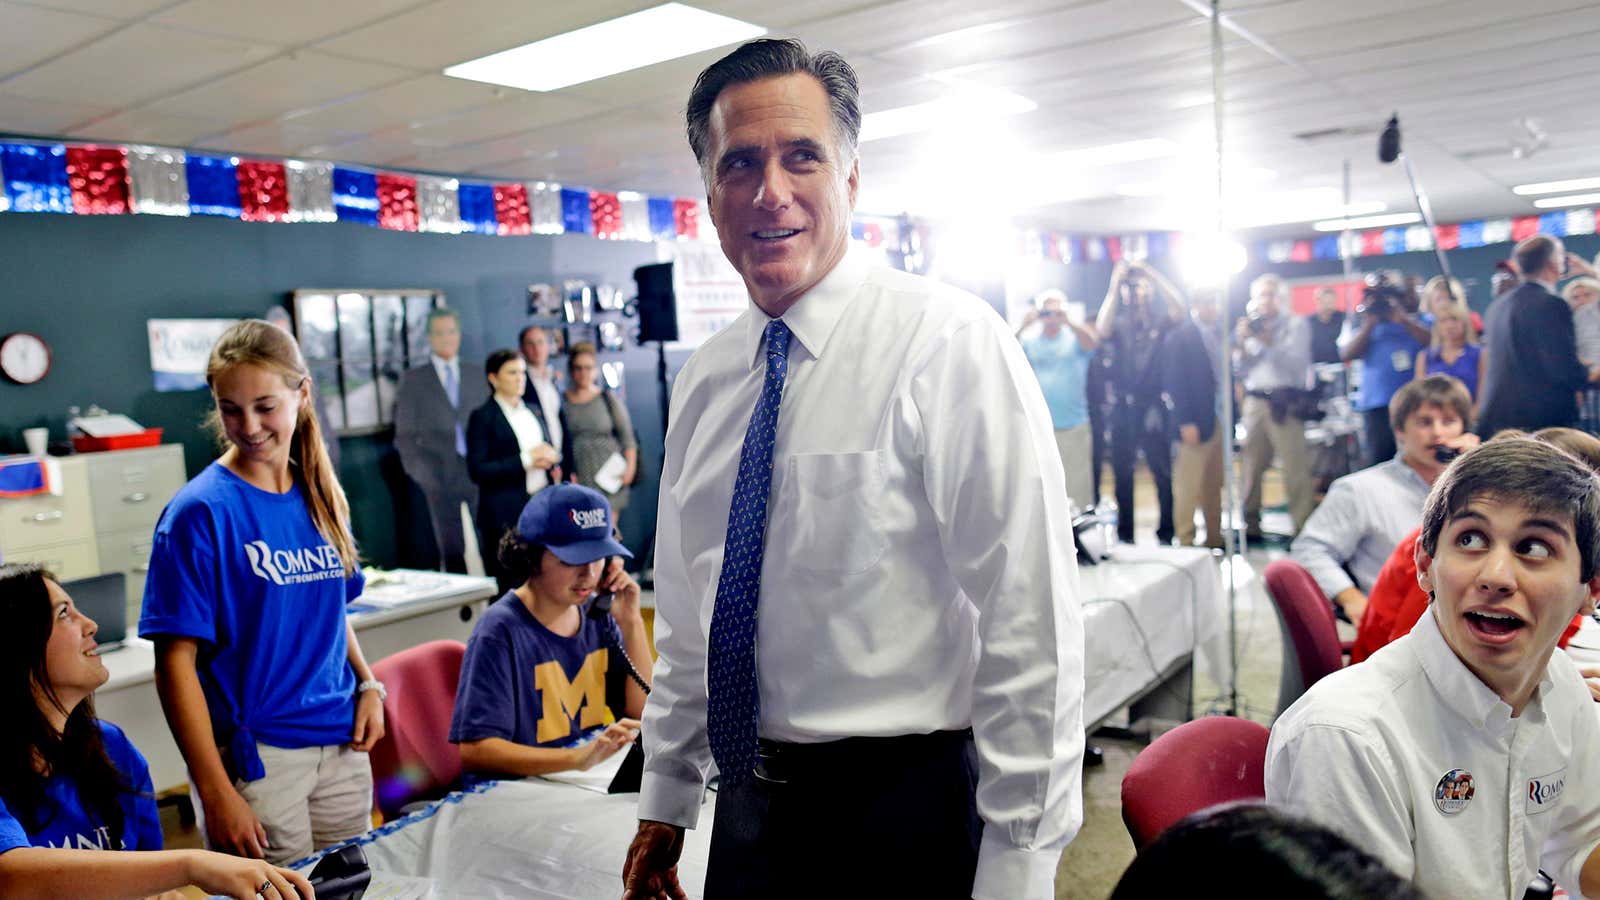 These kids don’t know it, but Mitt Romney is going after their wallets.